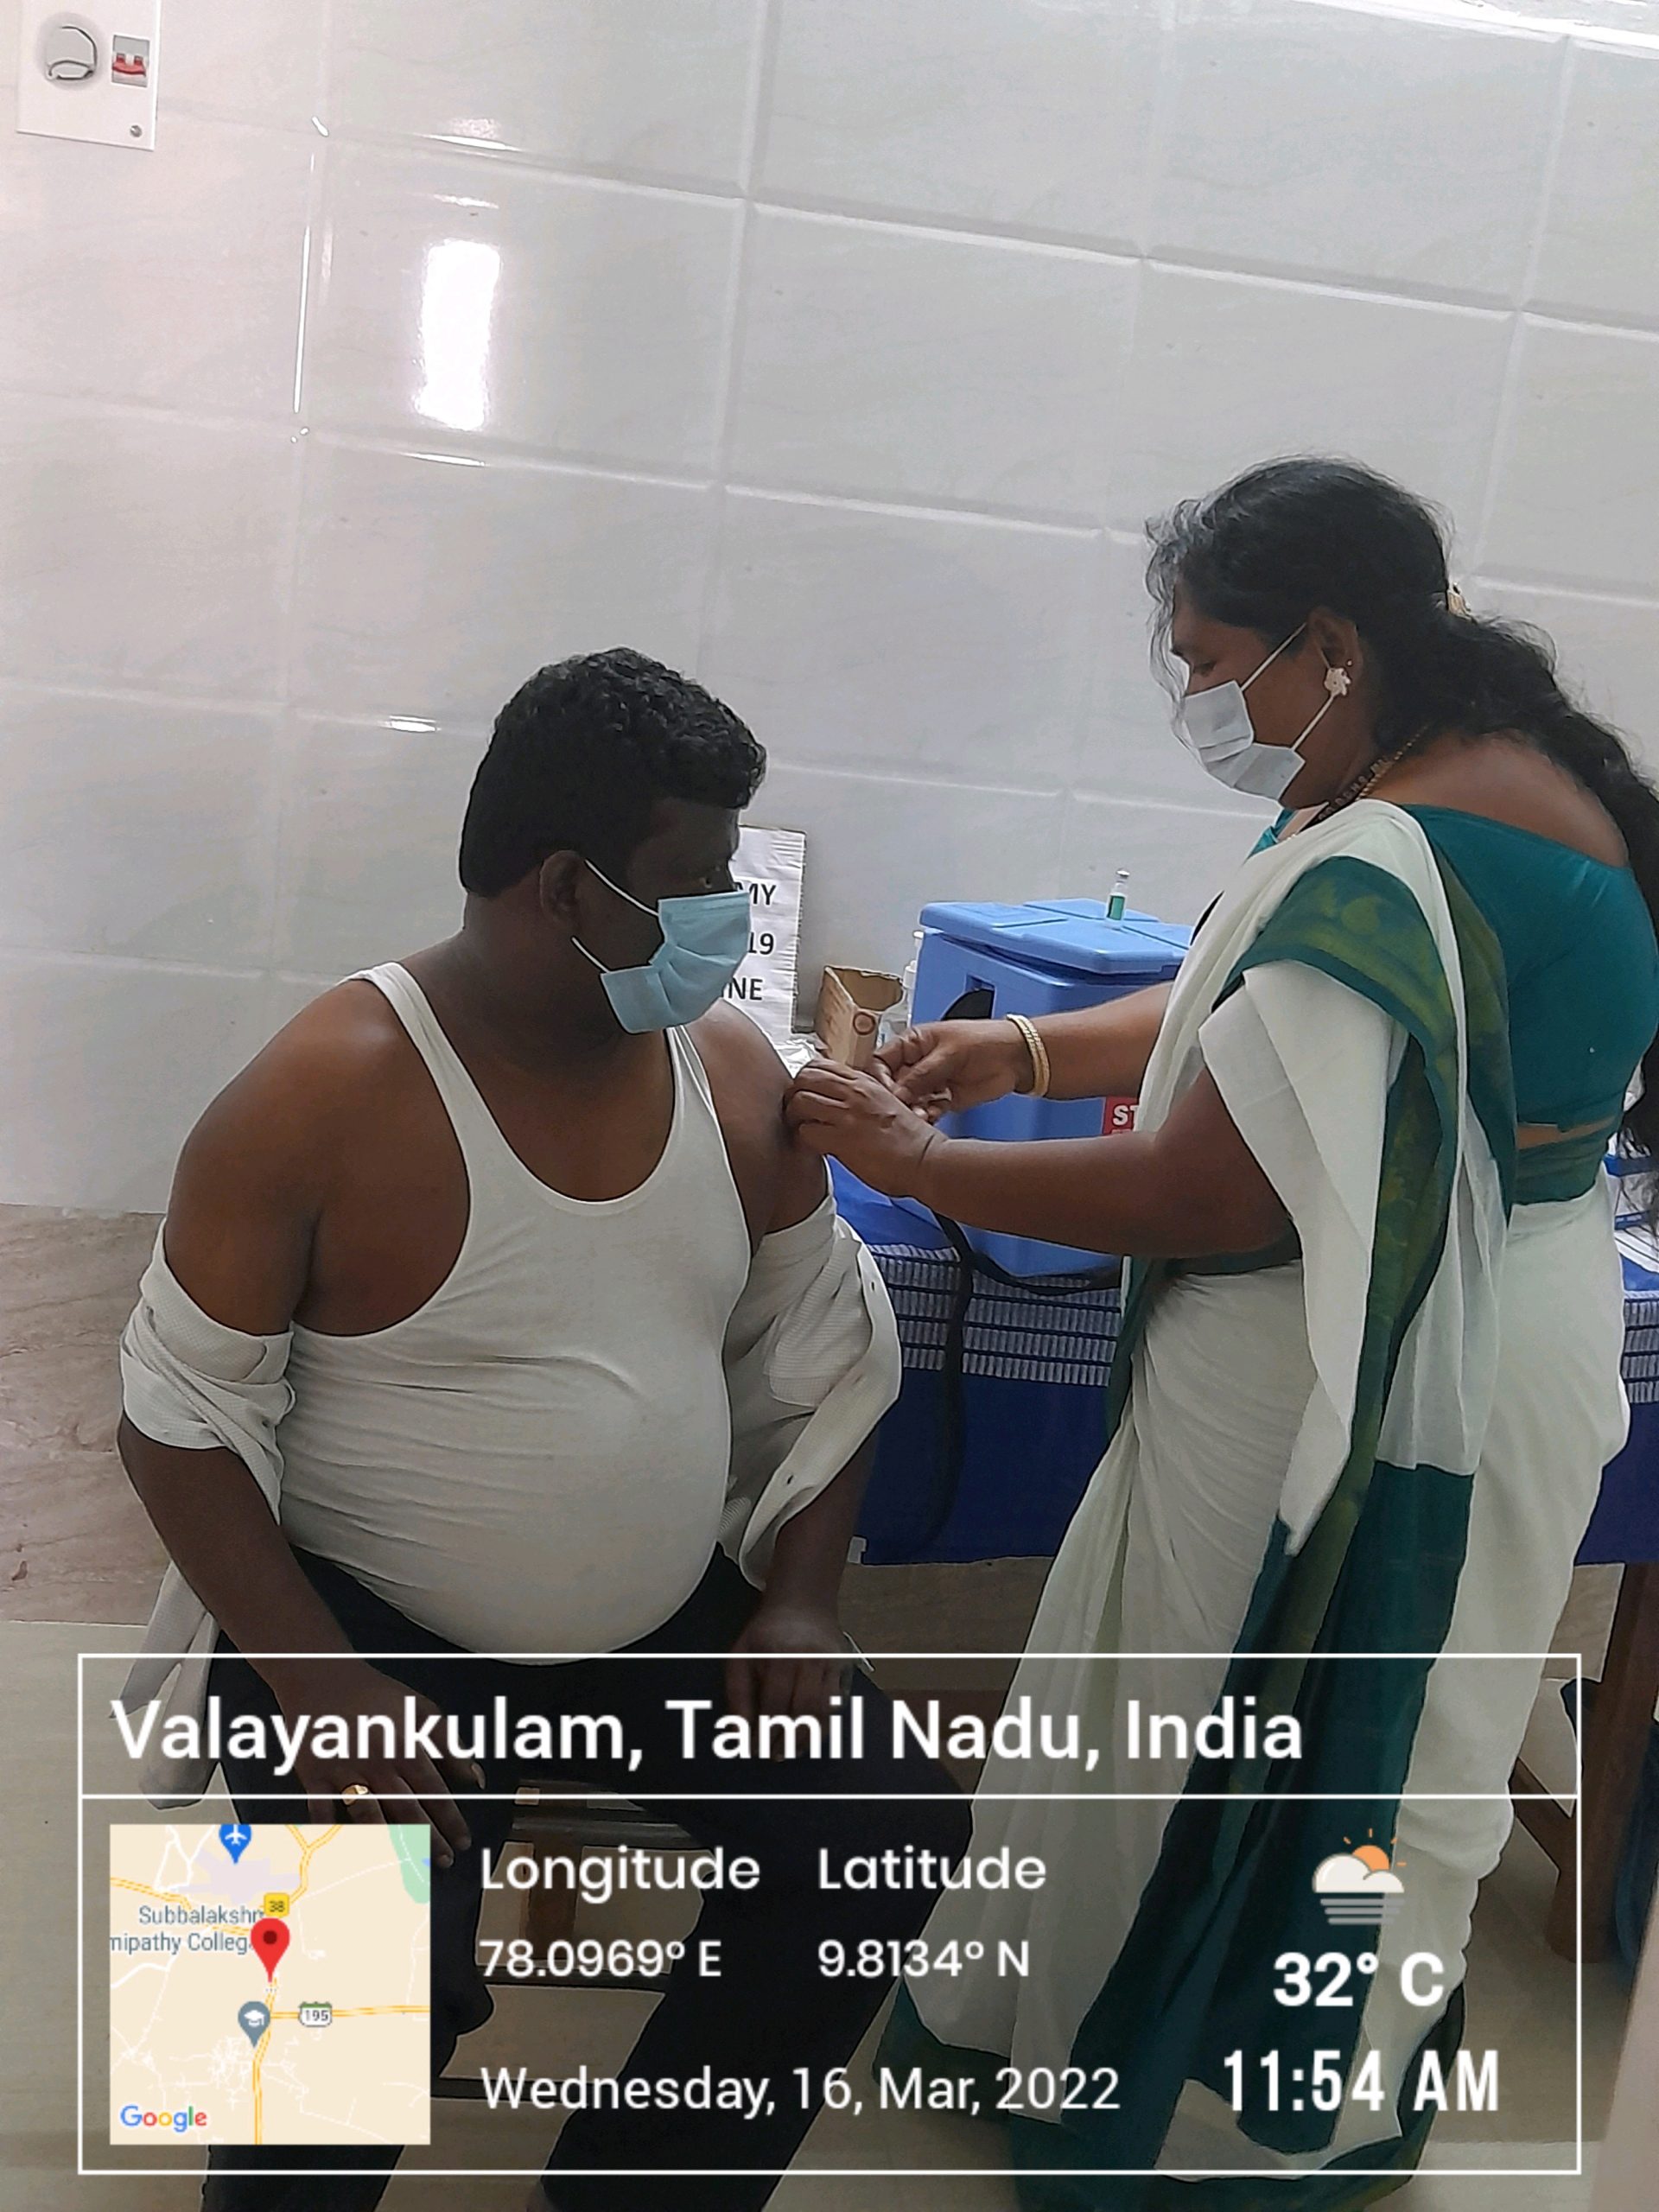 One day Vaccination camp at Valayankulam to celebrate National Vaccination Day